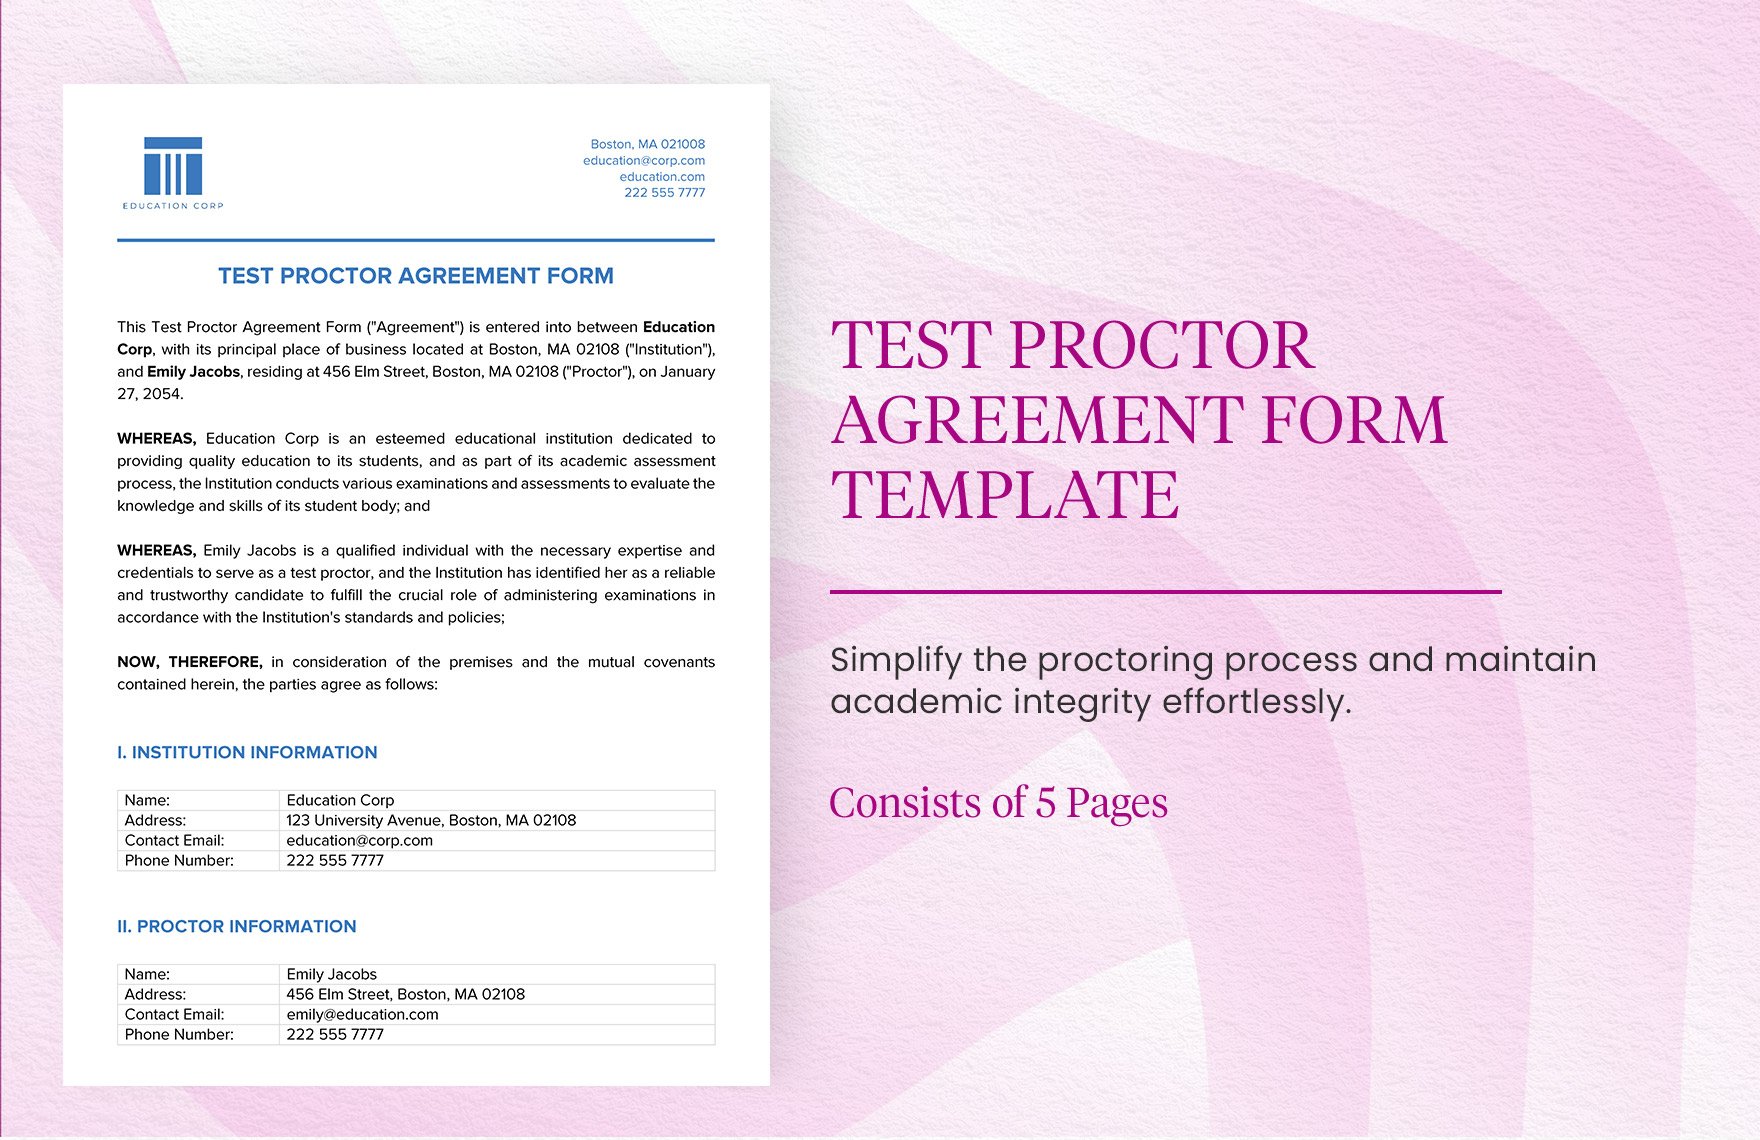 Test Proctor Agreement Form Template in Word, Google Docs, PDF